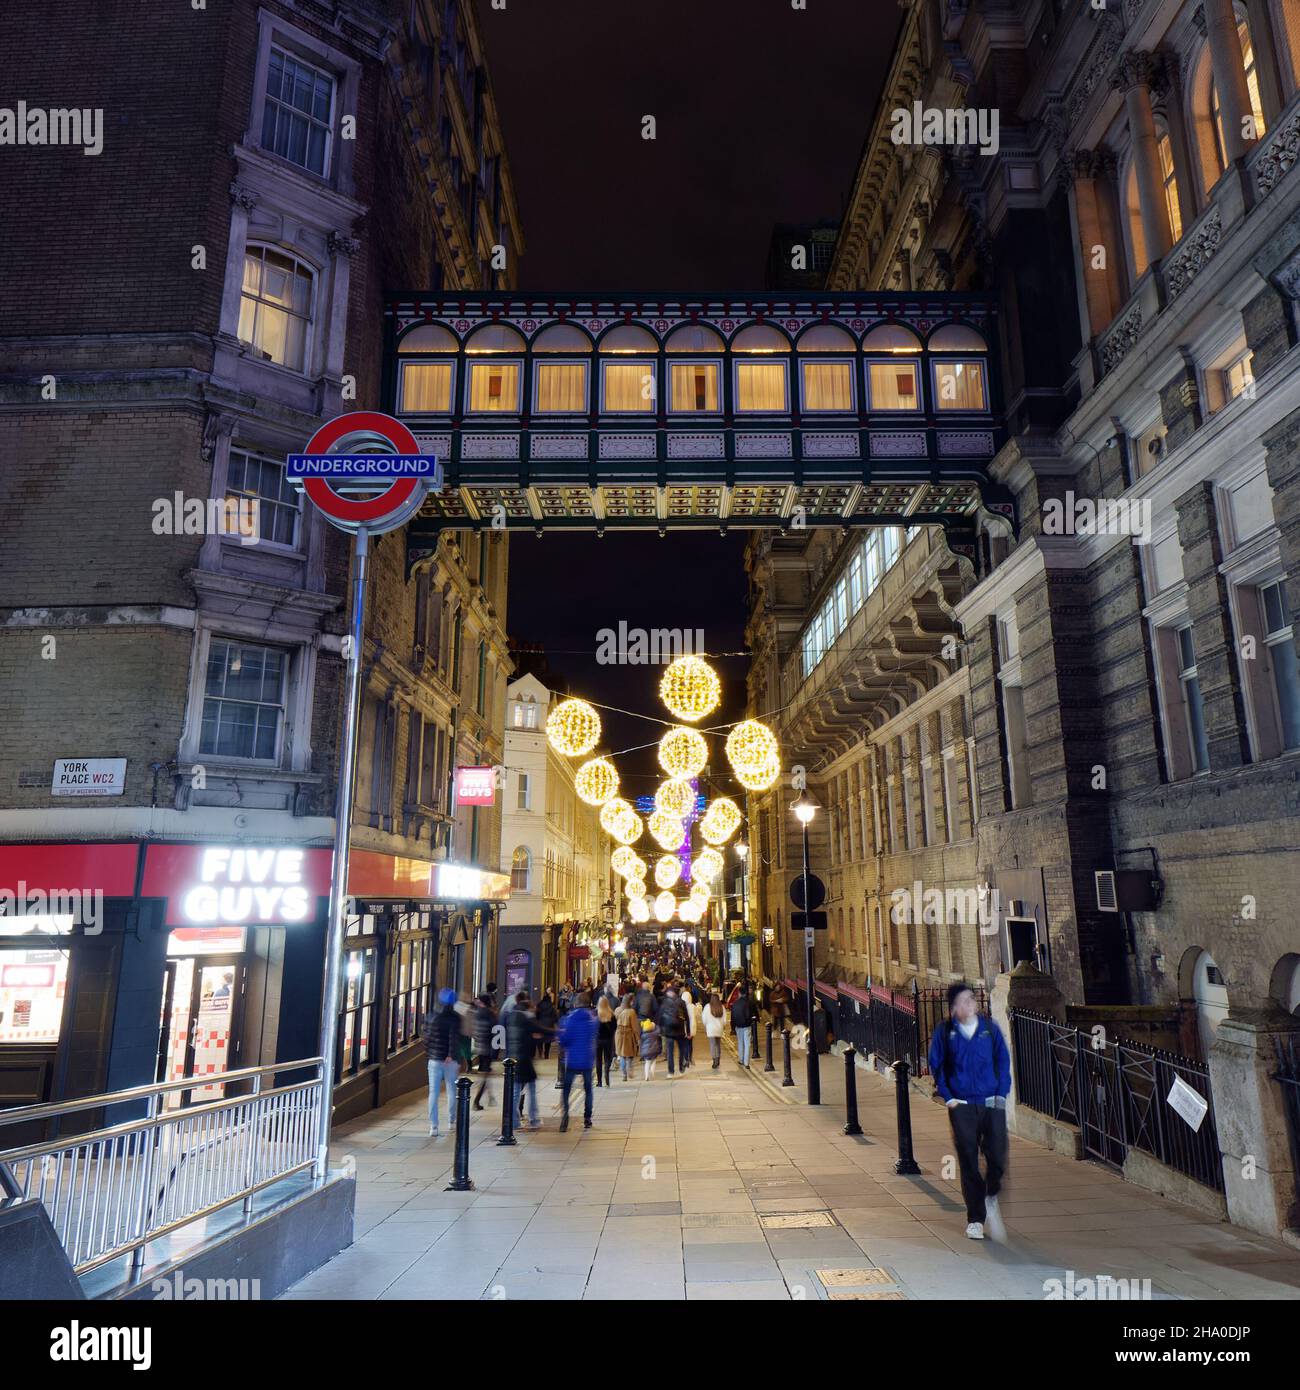 Illuminated raised walkway on Villiers Street near Charing Cross station on the right with an Underground Sign and festive lights. London. Stock Photo